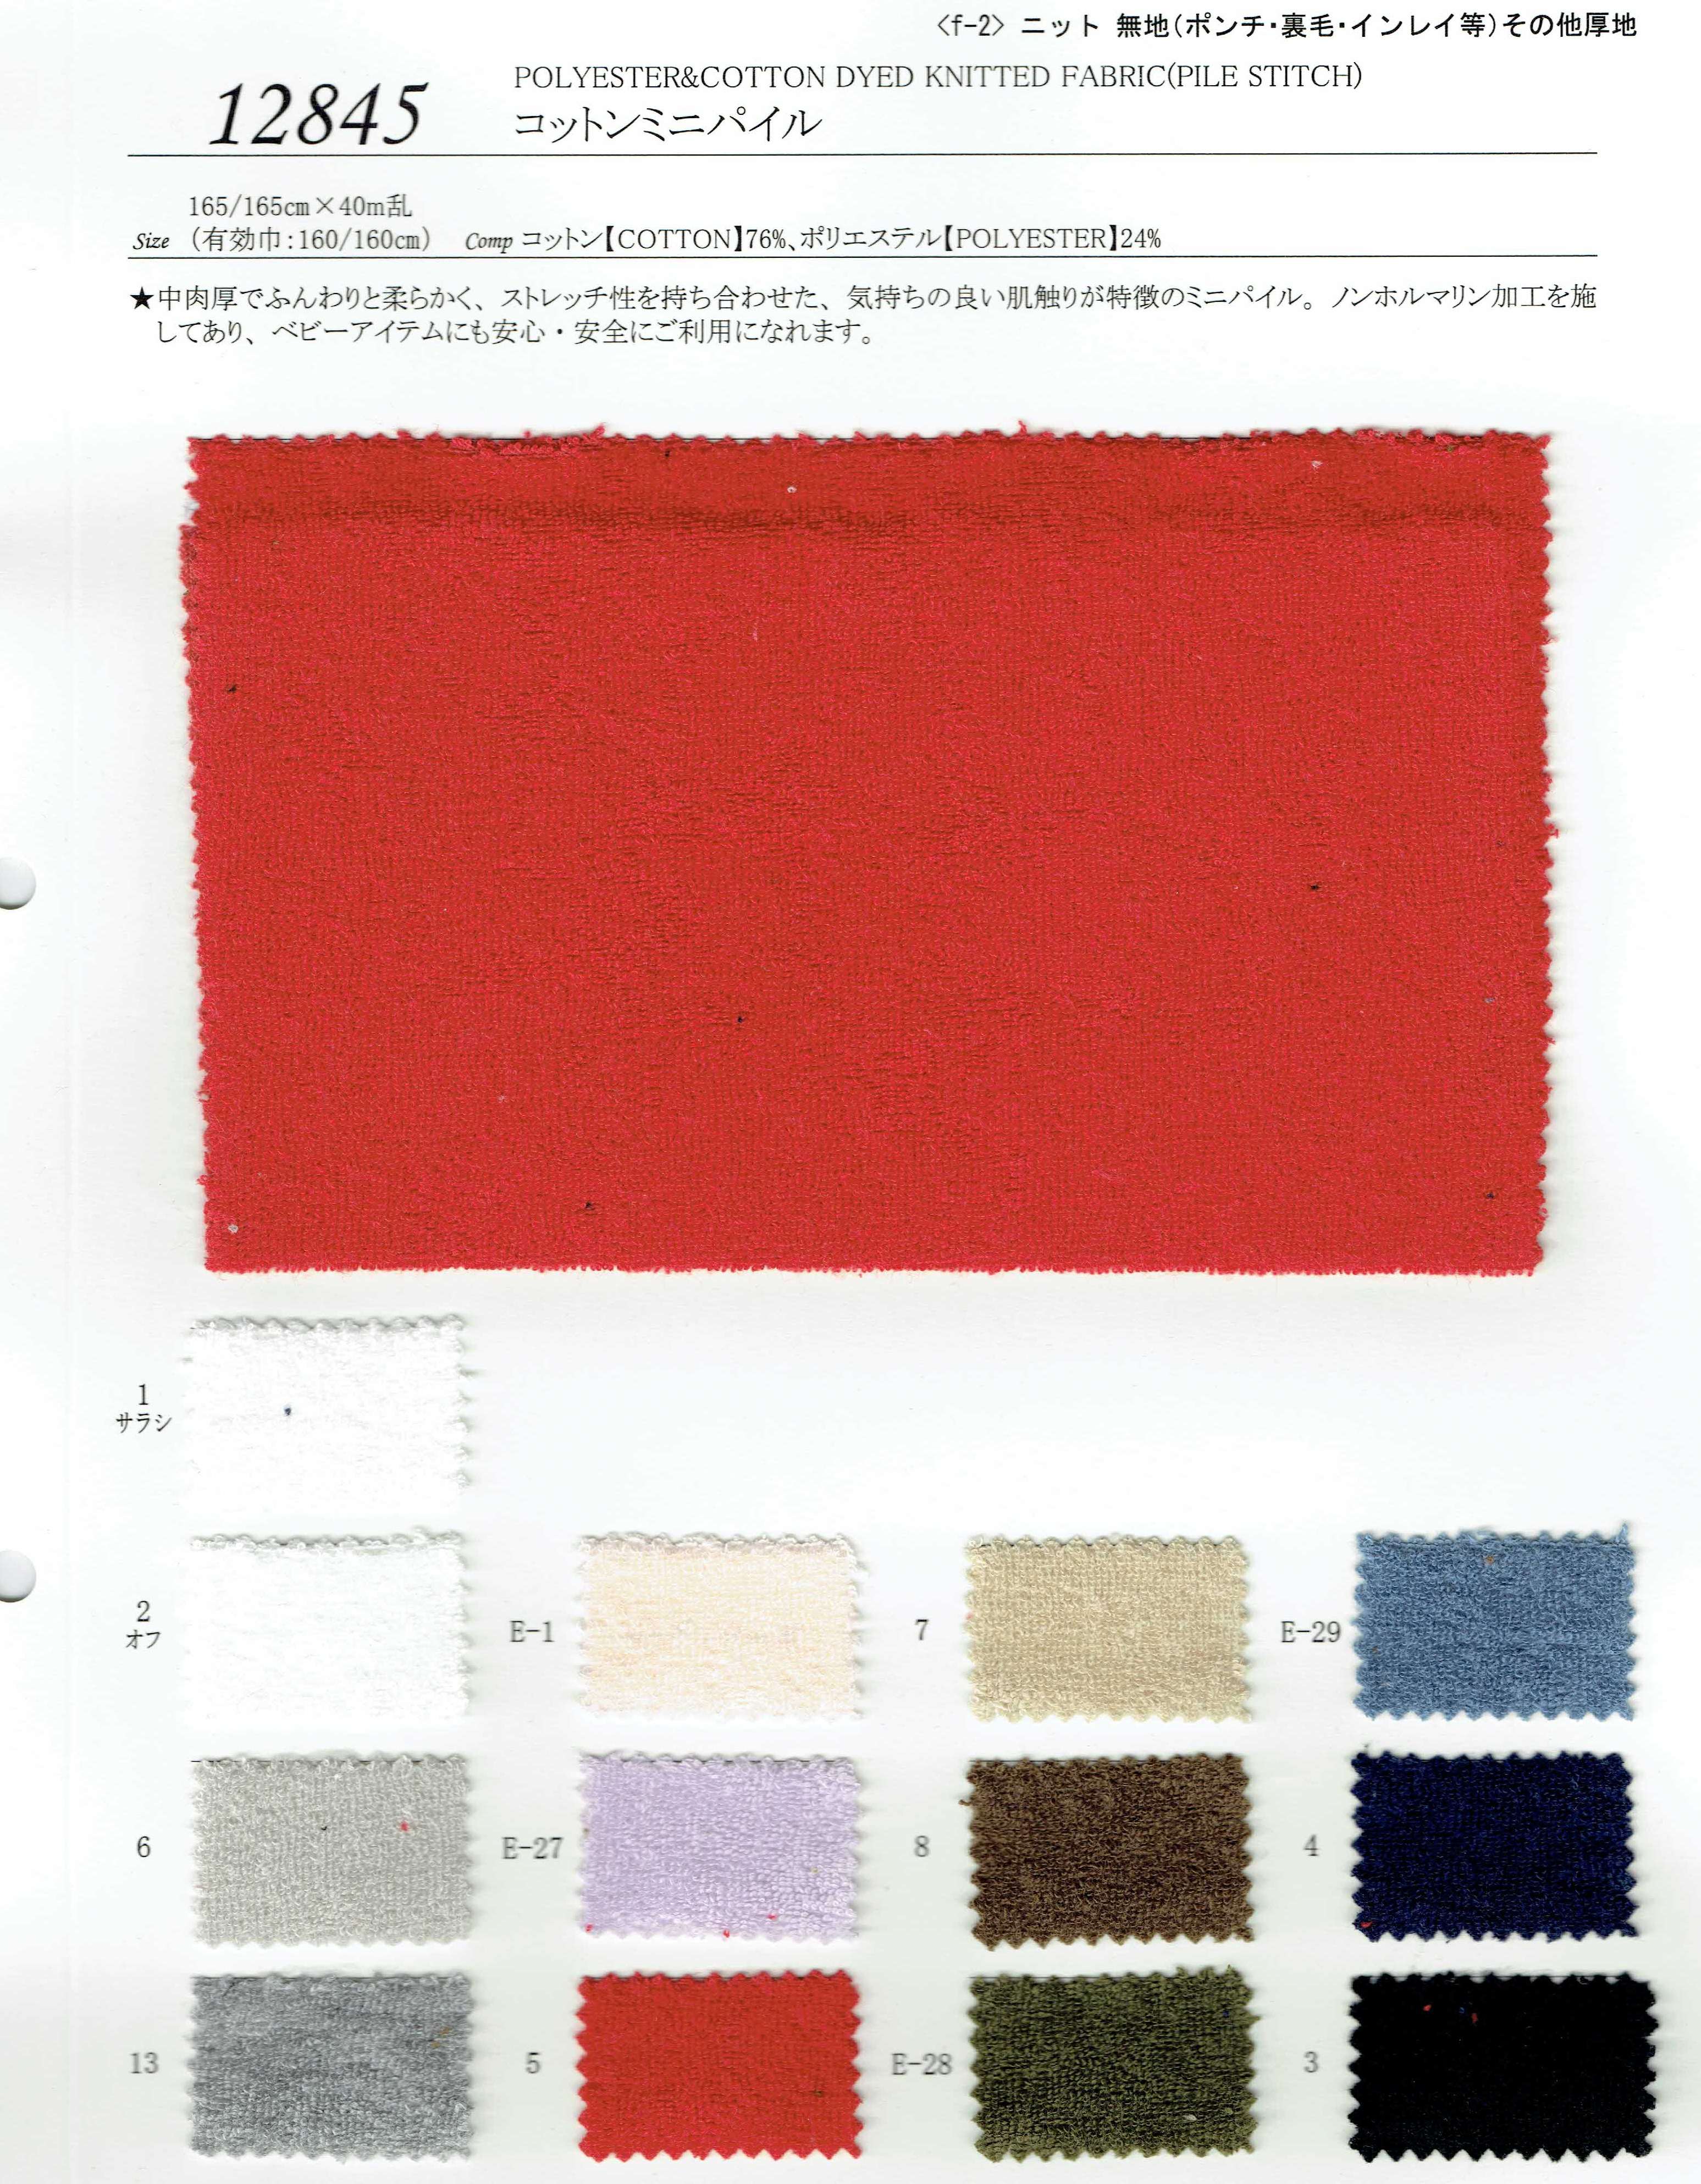 View COTTON76/POLYESTER24 DYED KNITTED FABRIC[PILE STITCH] DYED KNITTED FABRIC[PILE STITCH]